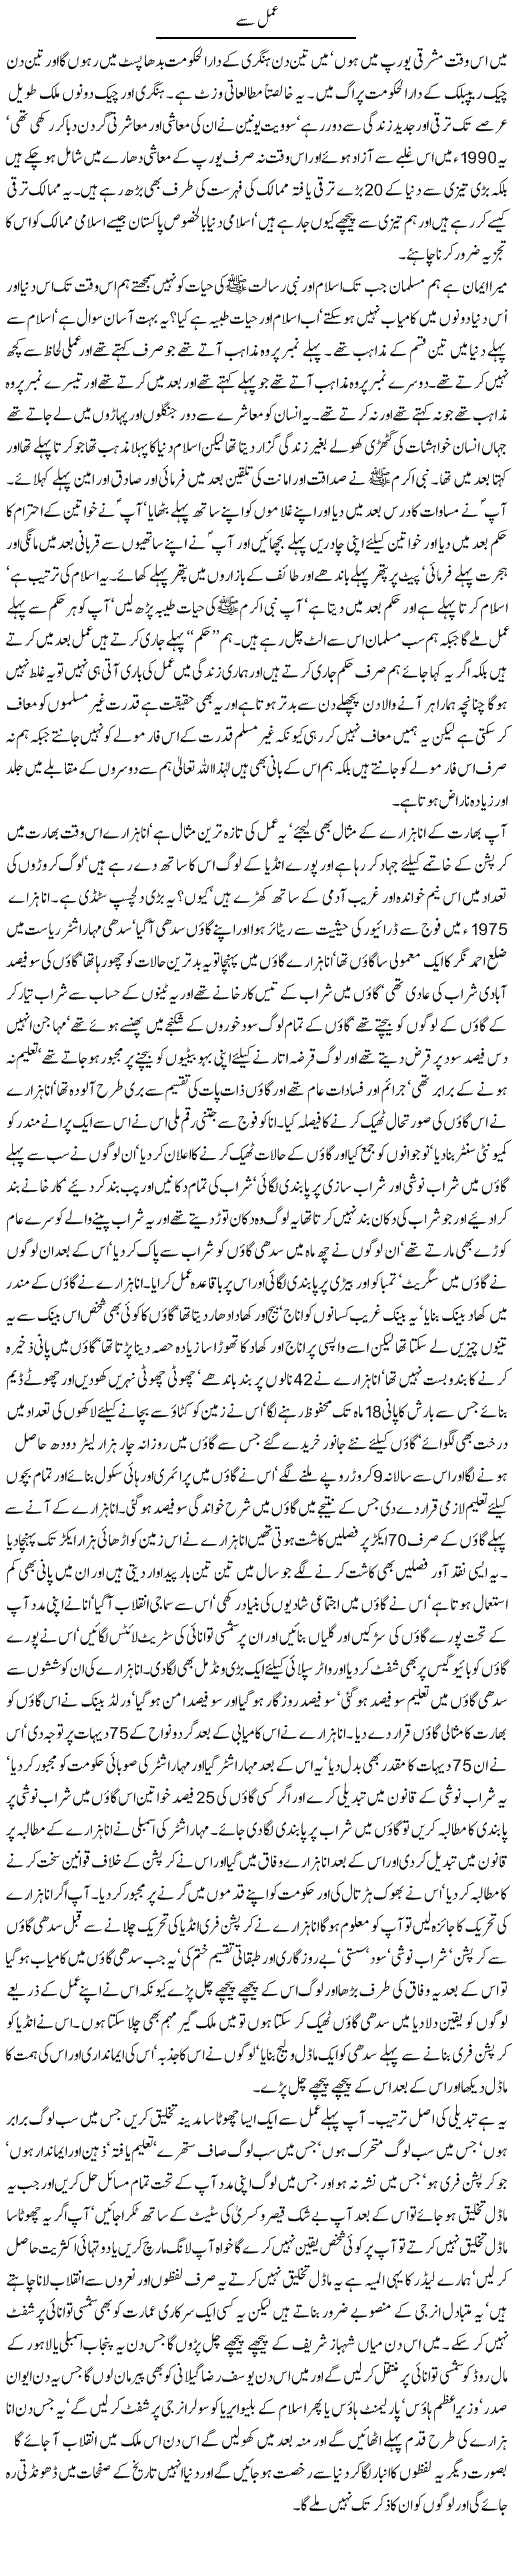 Islam and World Economy Express Column Javed Chaudhry 16 October 2011